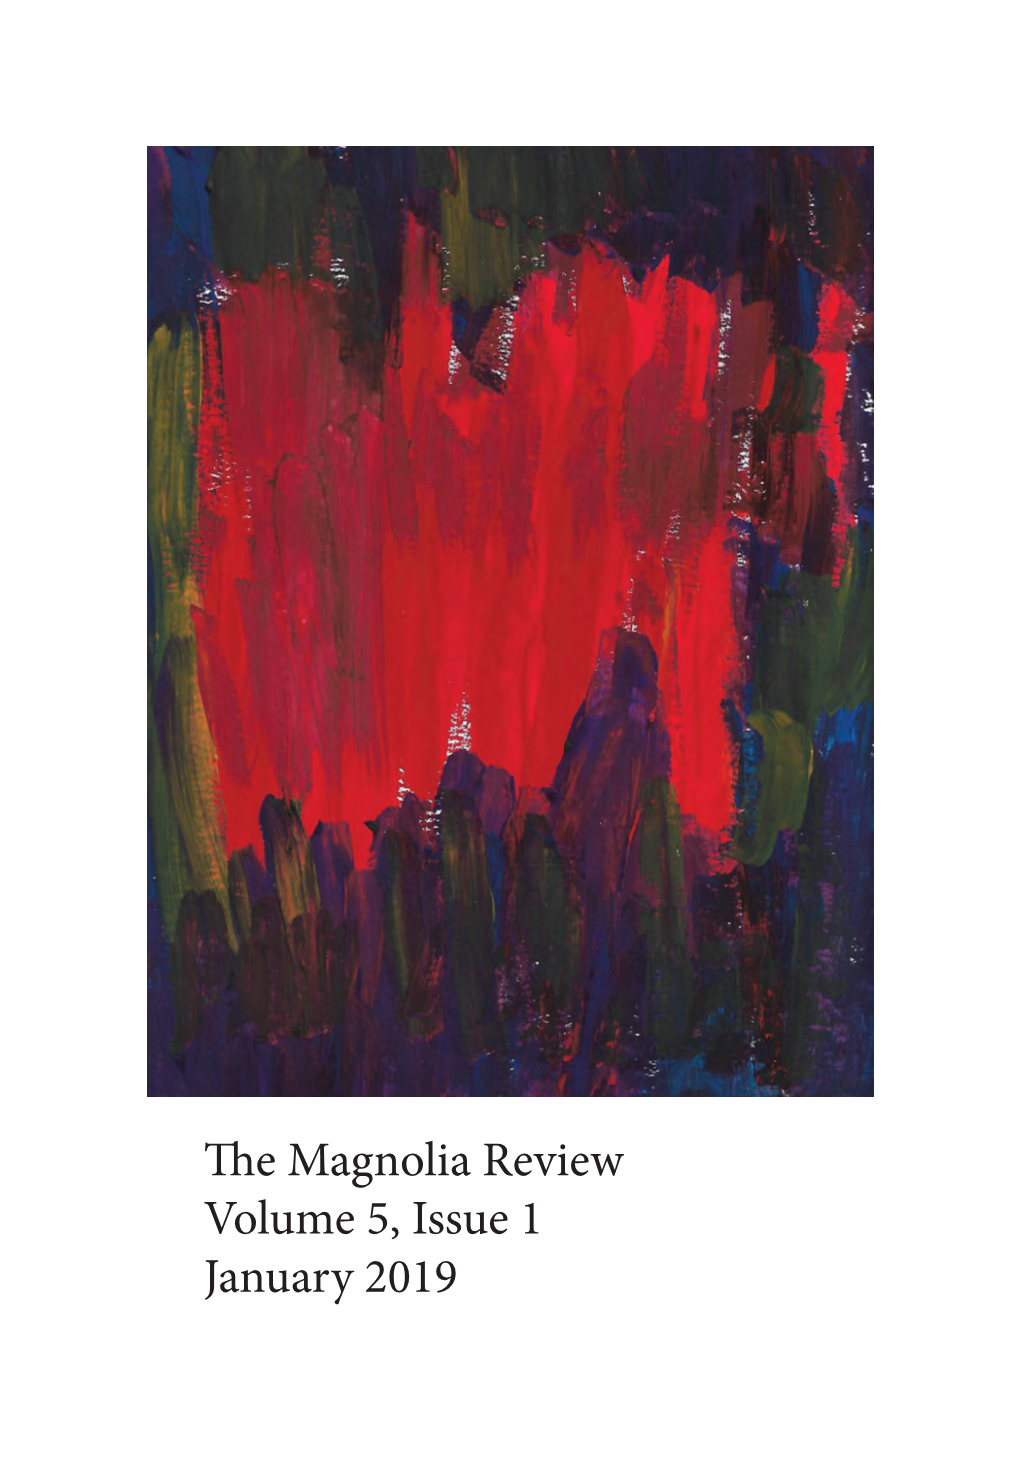 The Magnolia Review Volume 5, Issue 1 January 2019 Editor-In-Chief and Founder: Suzanna Anderson